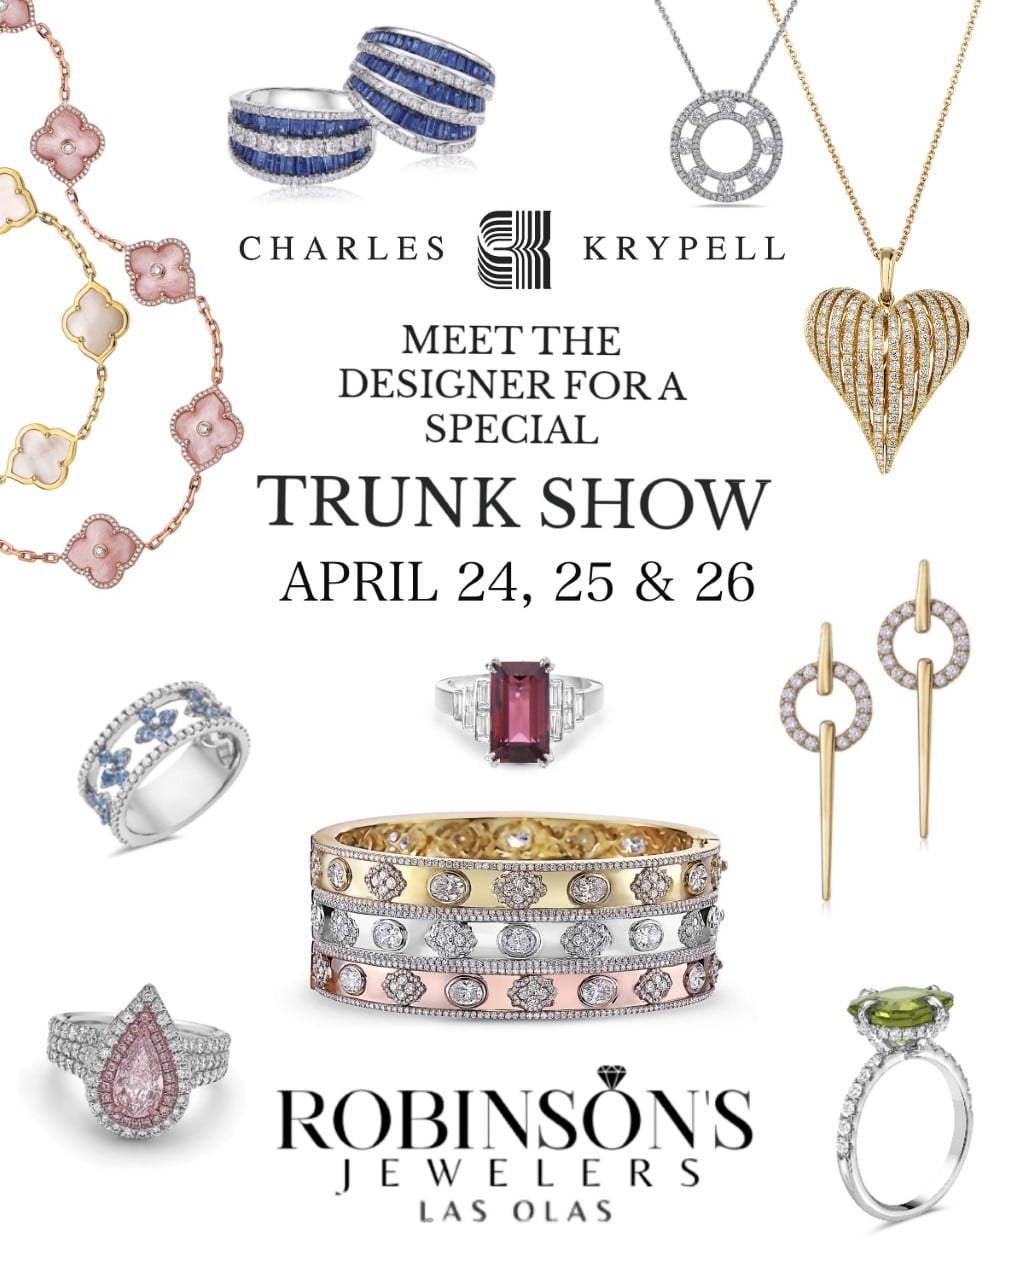 Robinson's Jewelers - Charles Krypell Trunk Show